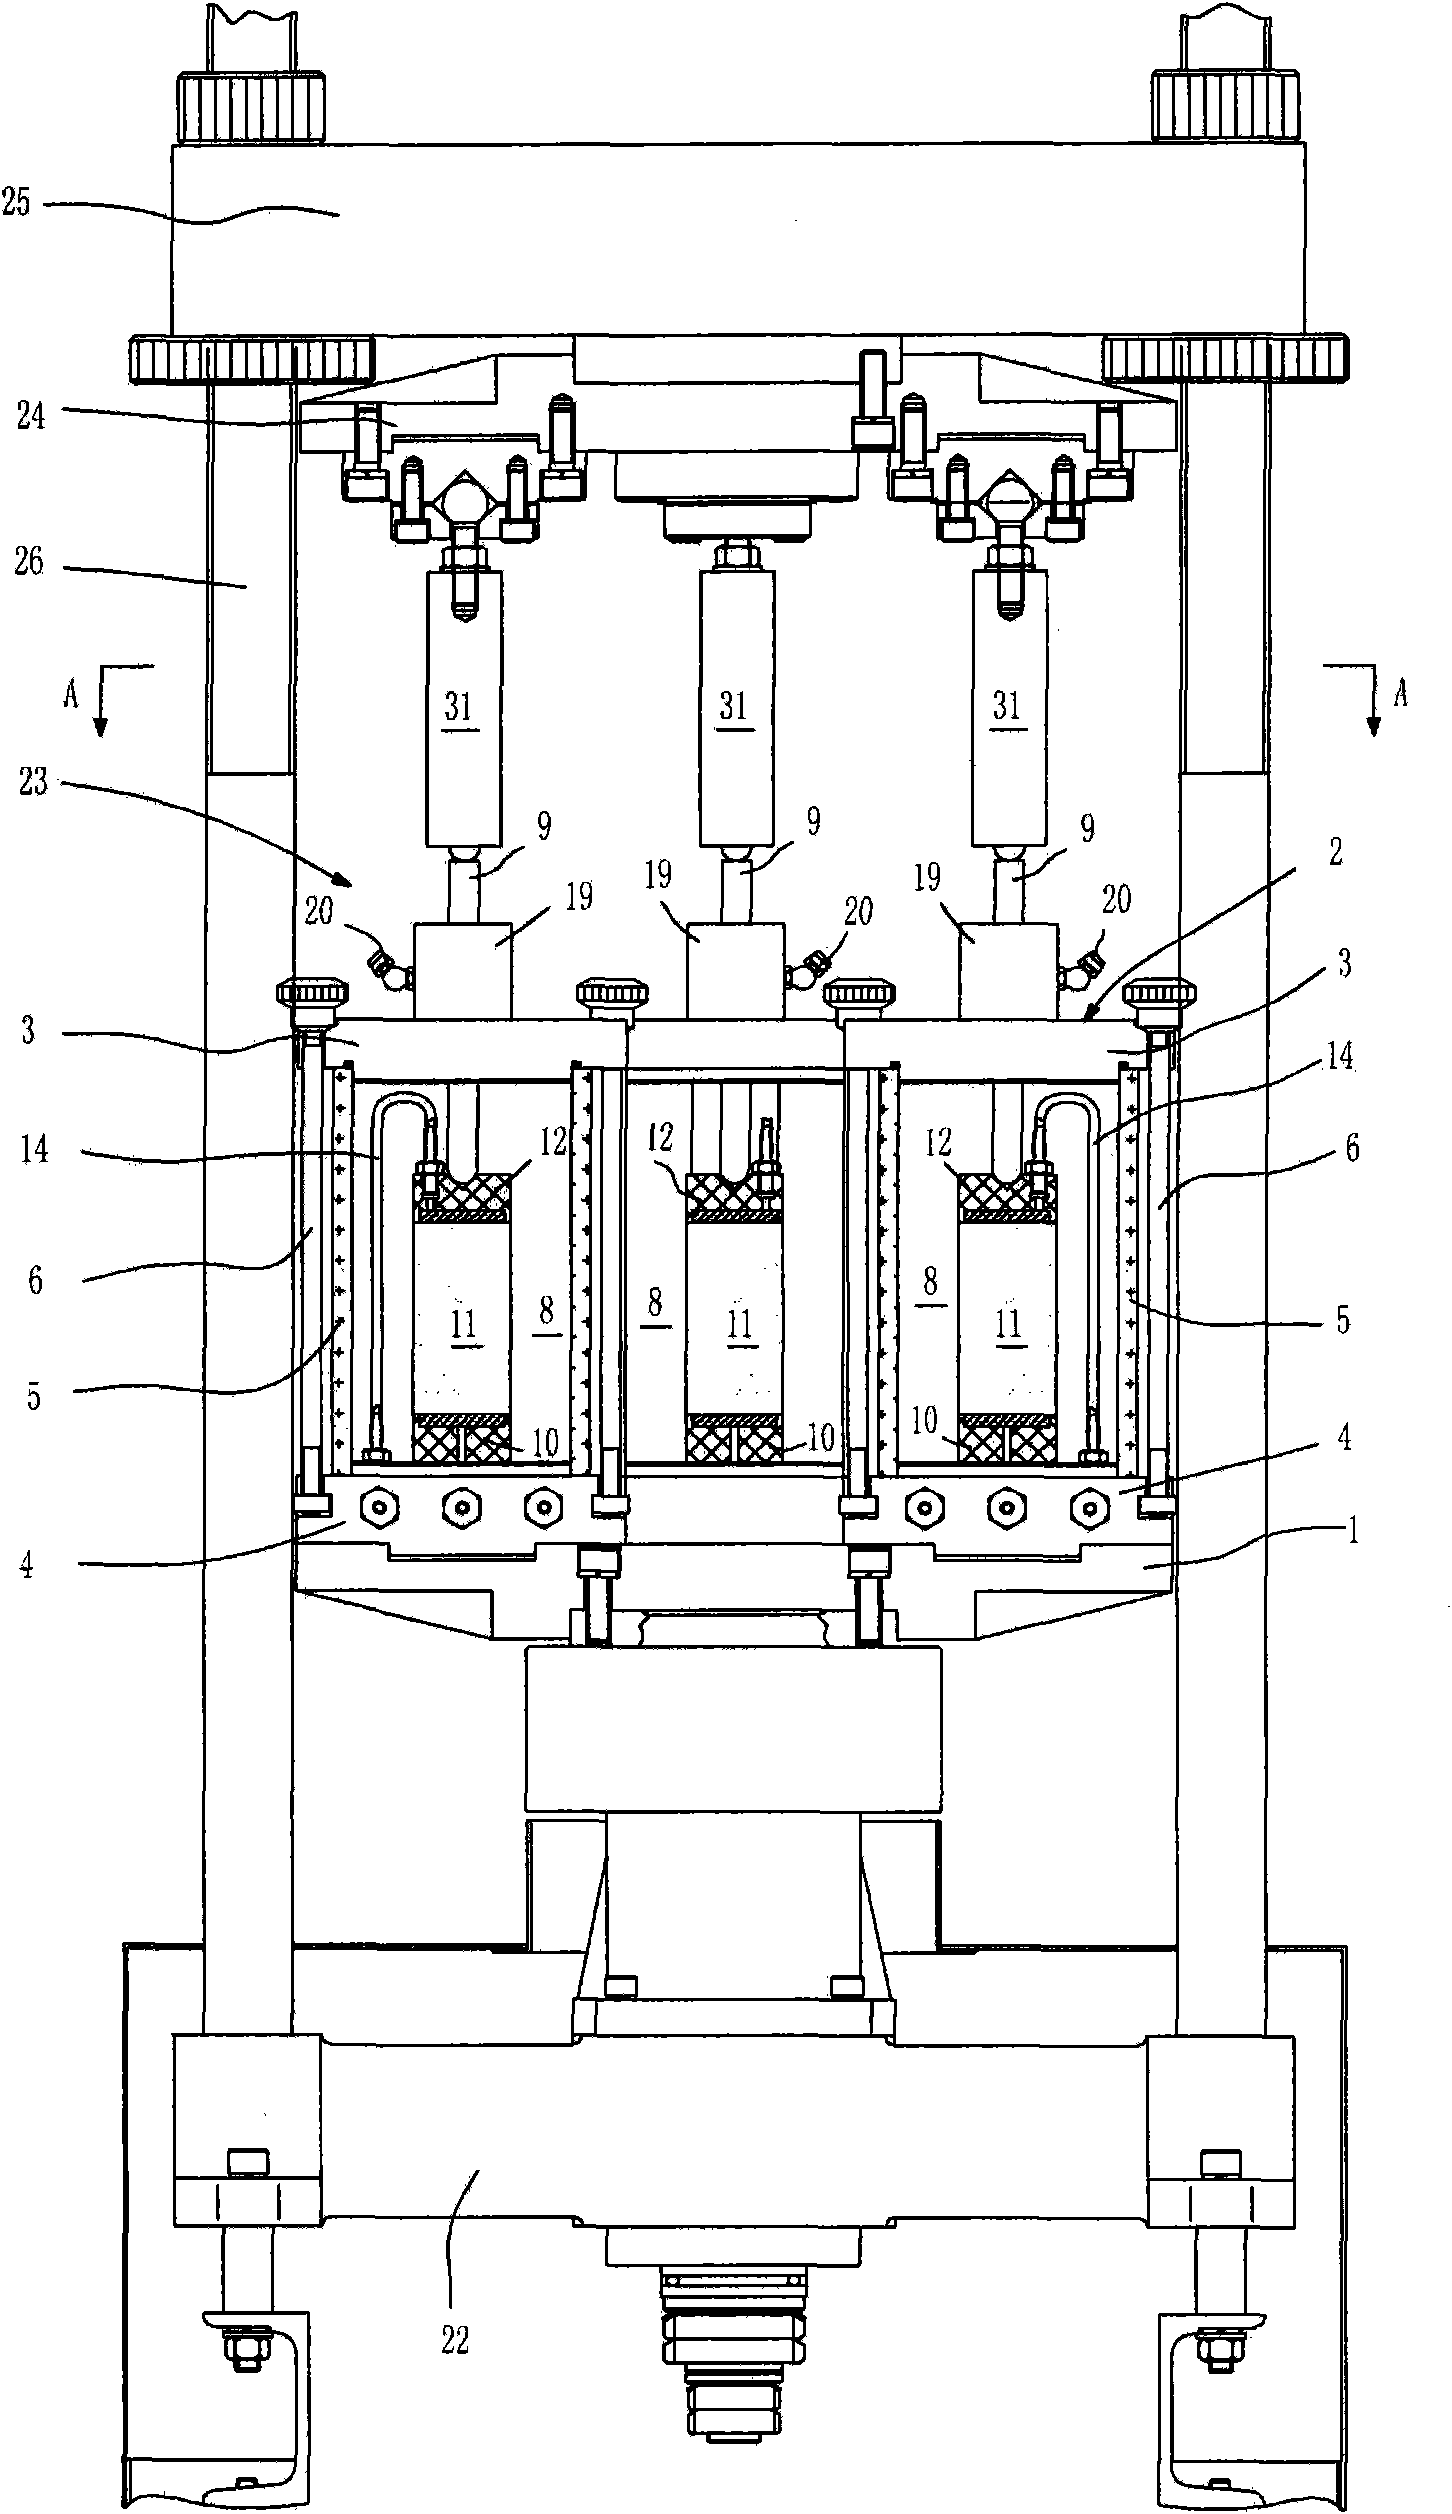 Improved type triaxial apparatus